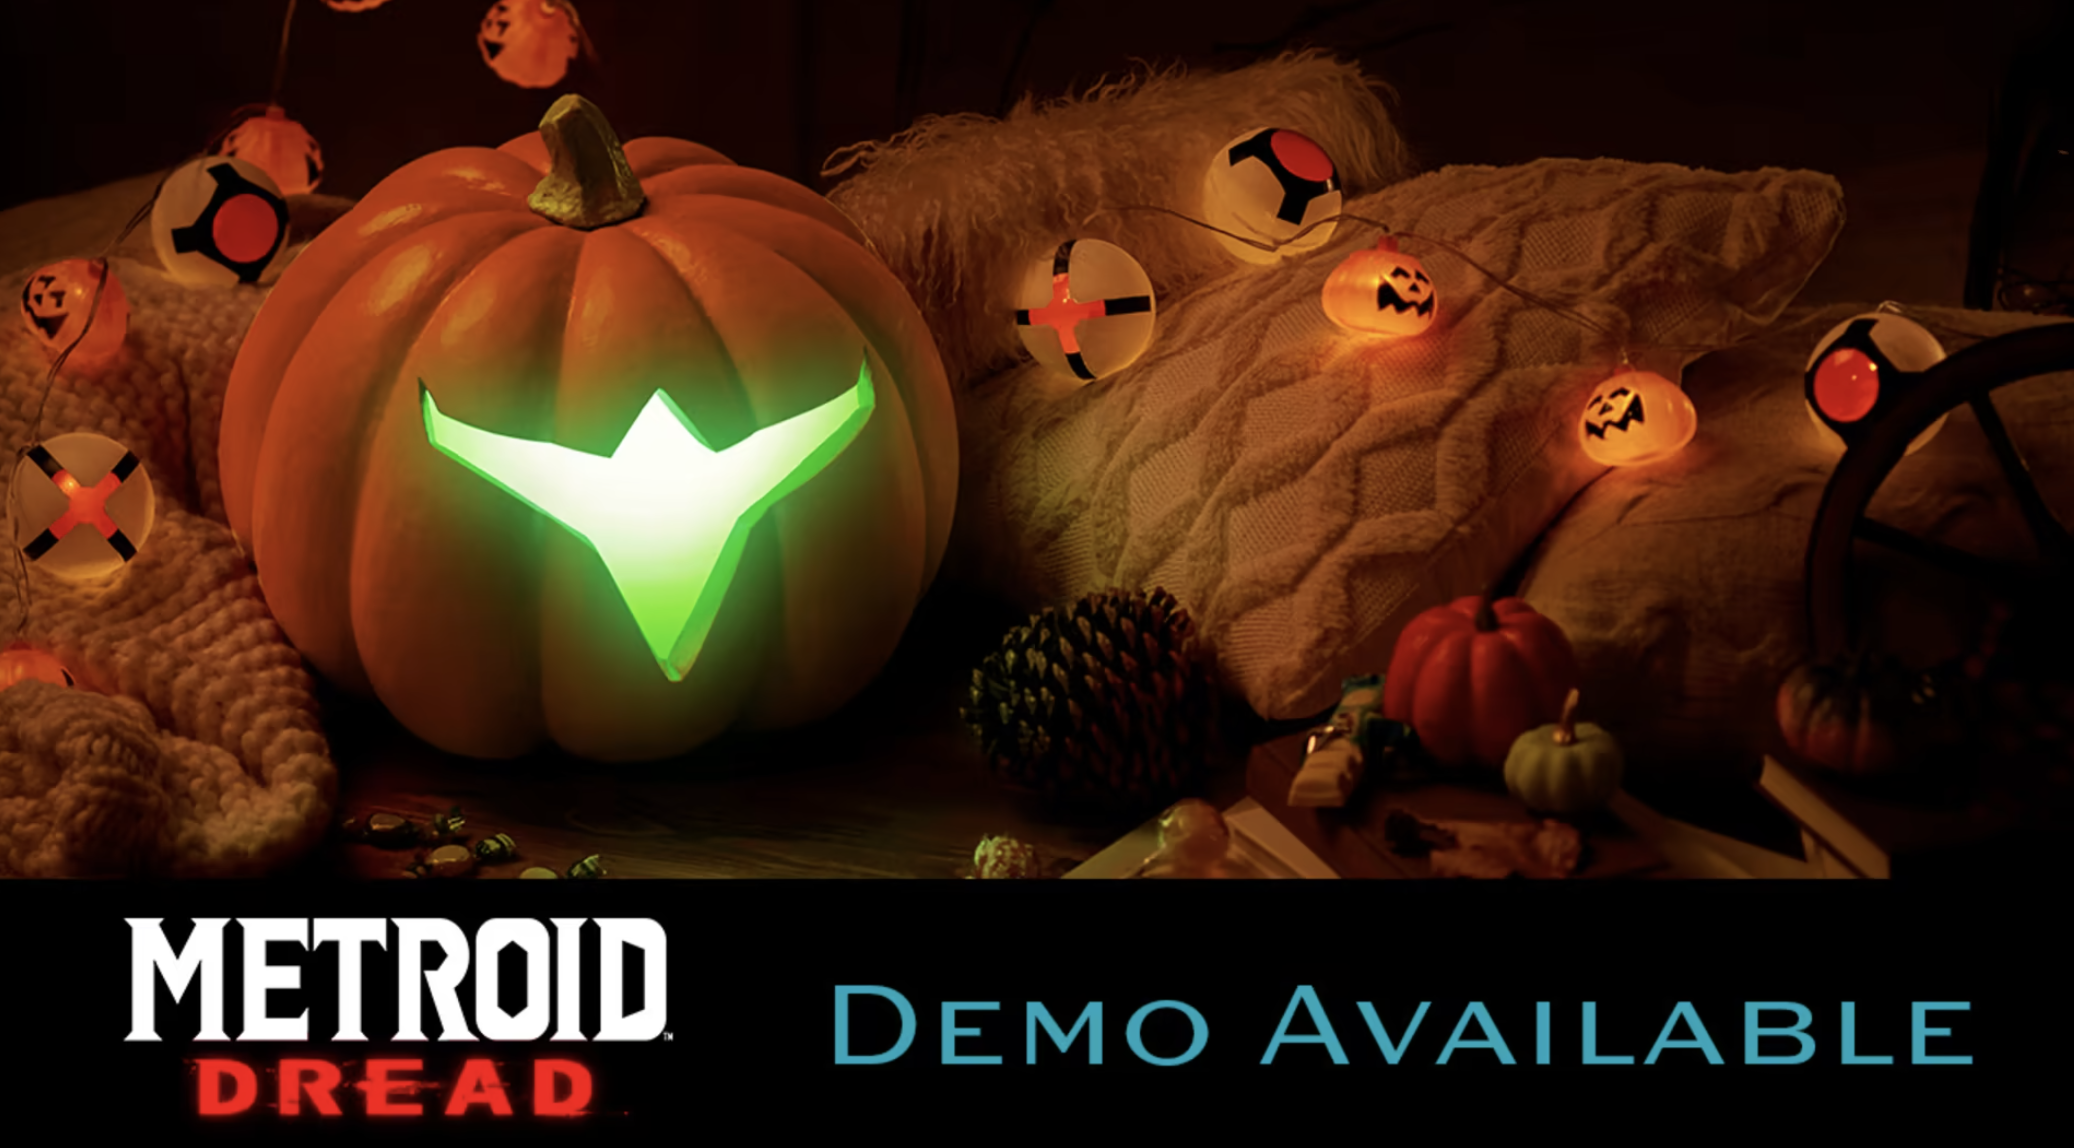 Demo Switch, Metroid Nintendo It To Here\'s Dread Out - On How Now Download GameSpot Free